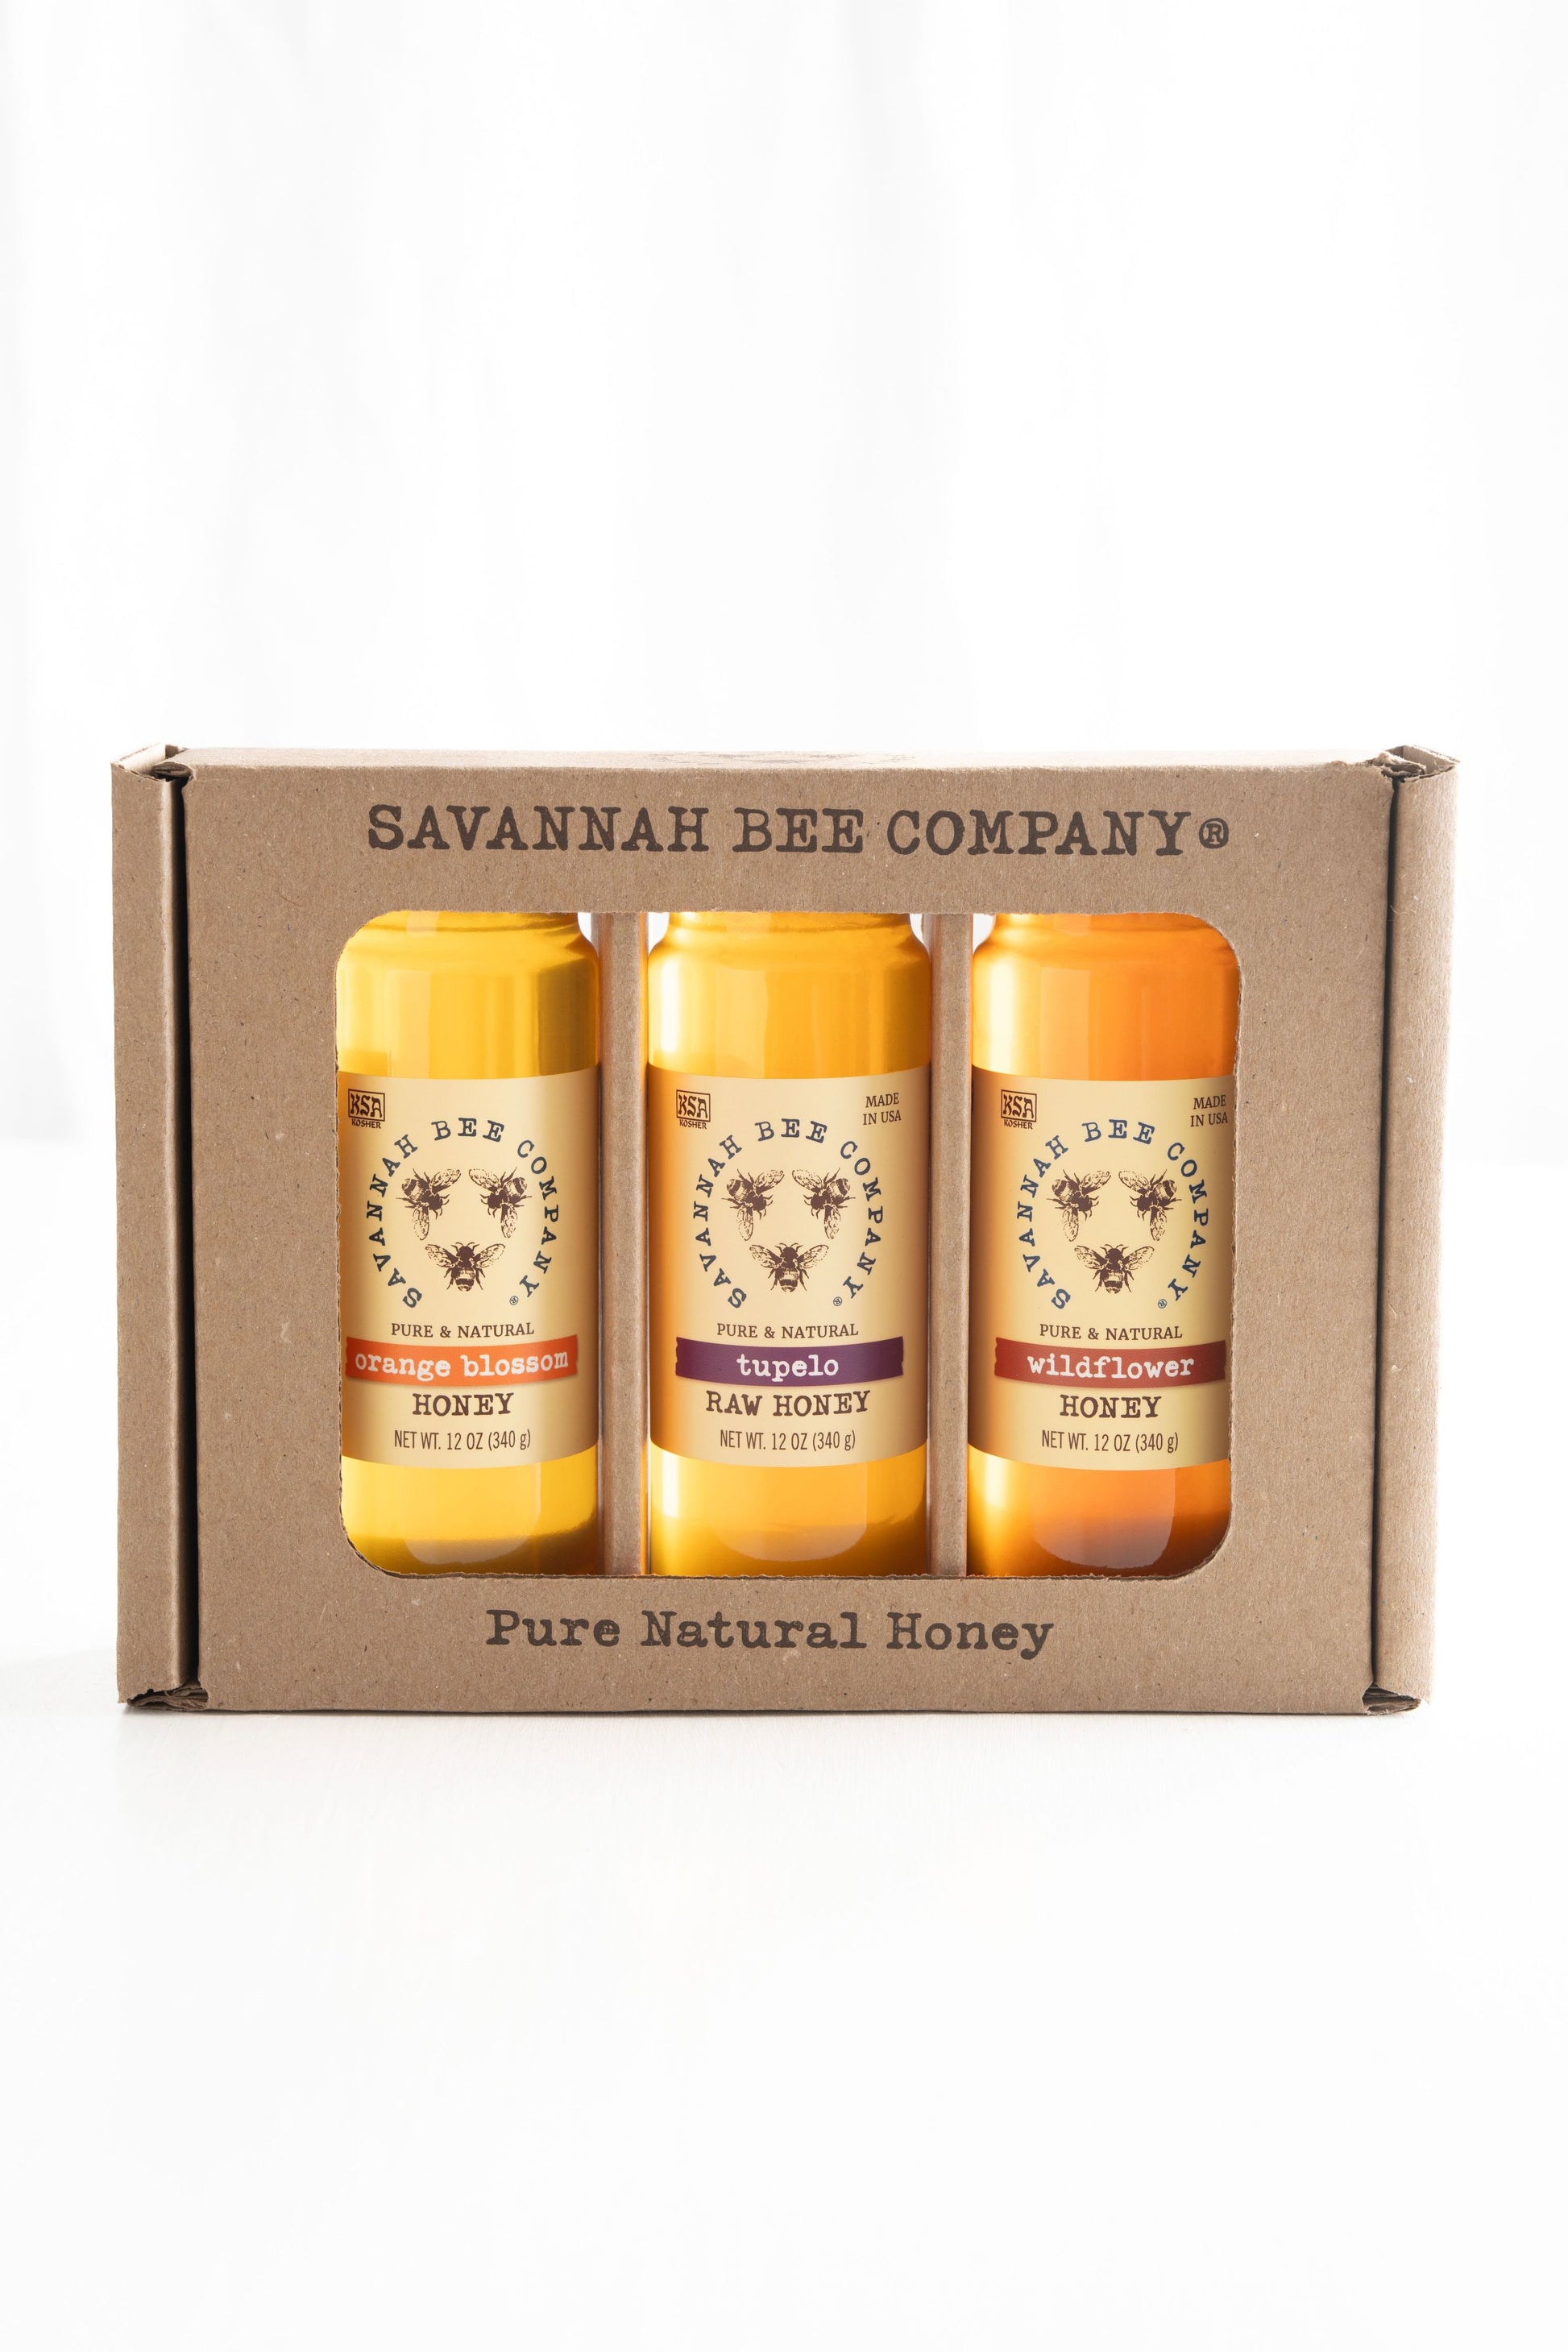 29 Buzzworthy Bee Gifts For Anyone Who Just Loves Bees